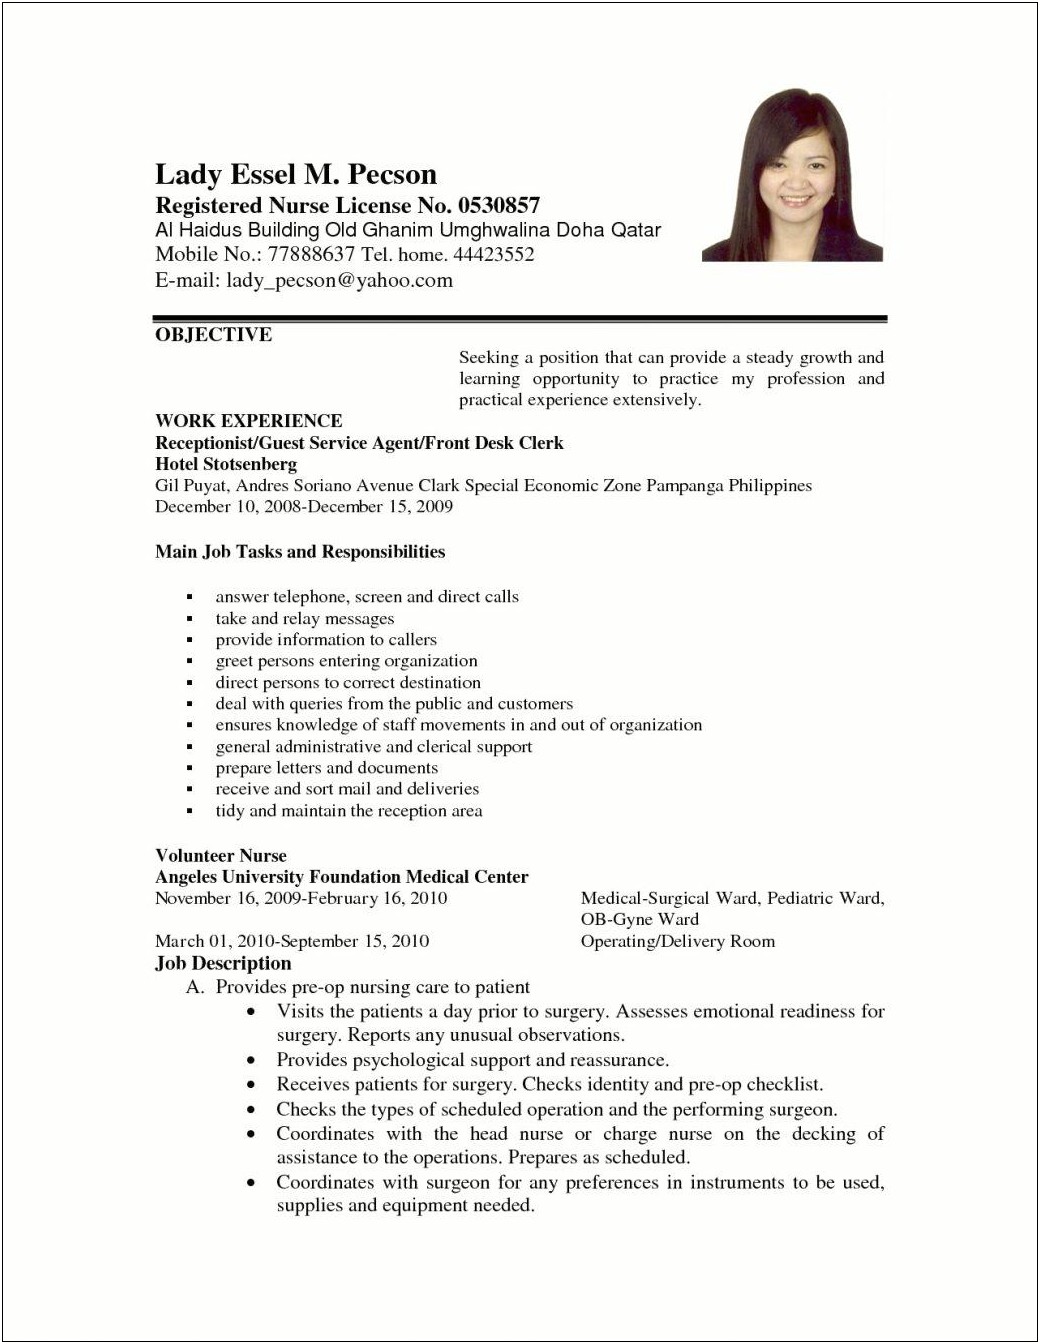 Objectives On A Resume Dealing In Customer Service